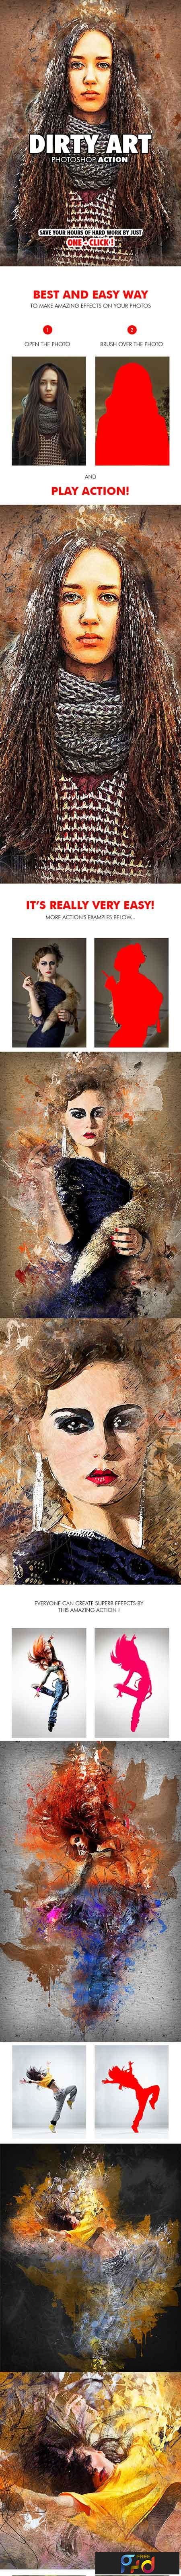 Dirty Art Photoshop Action 19573400 1